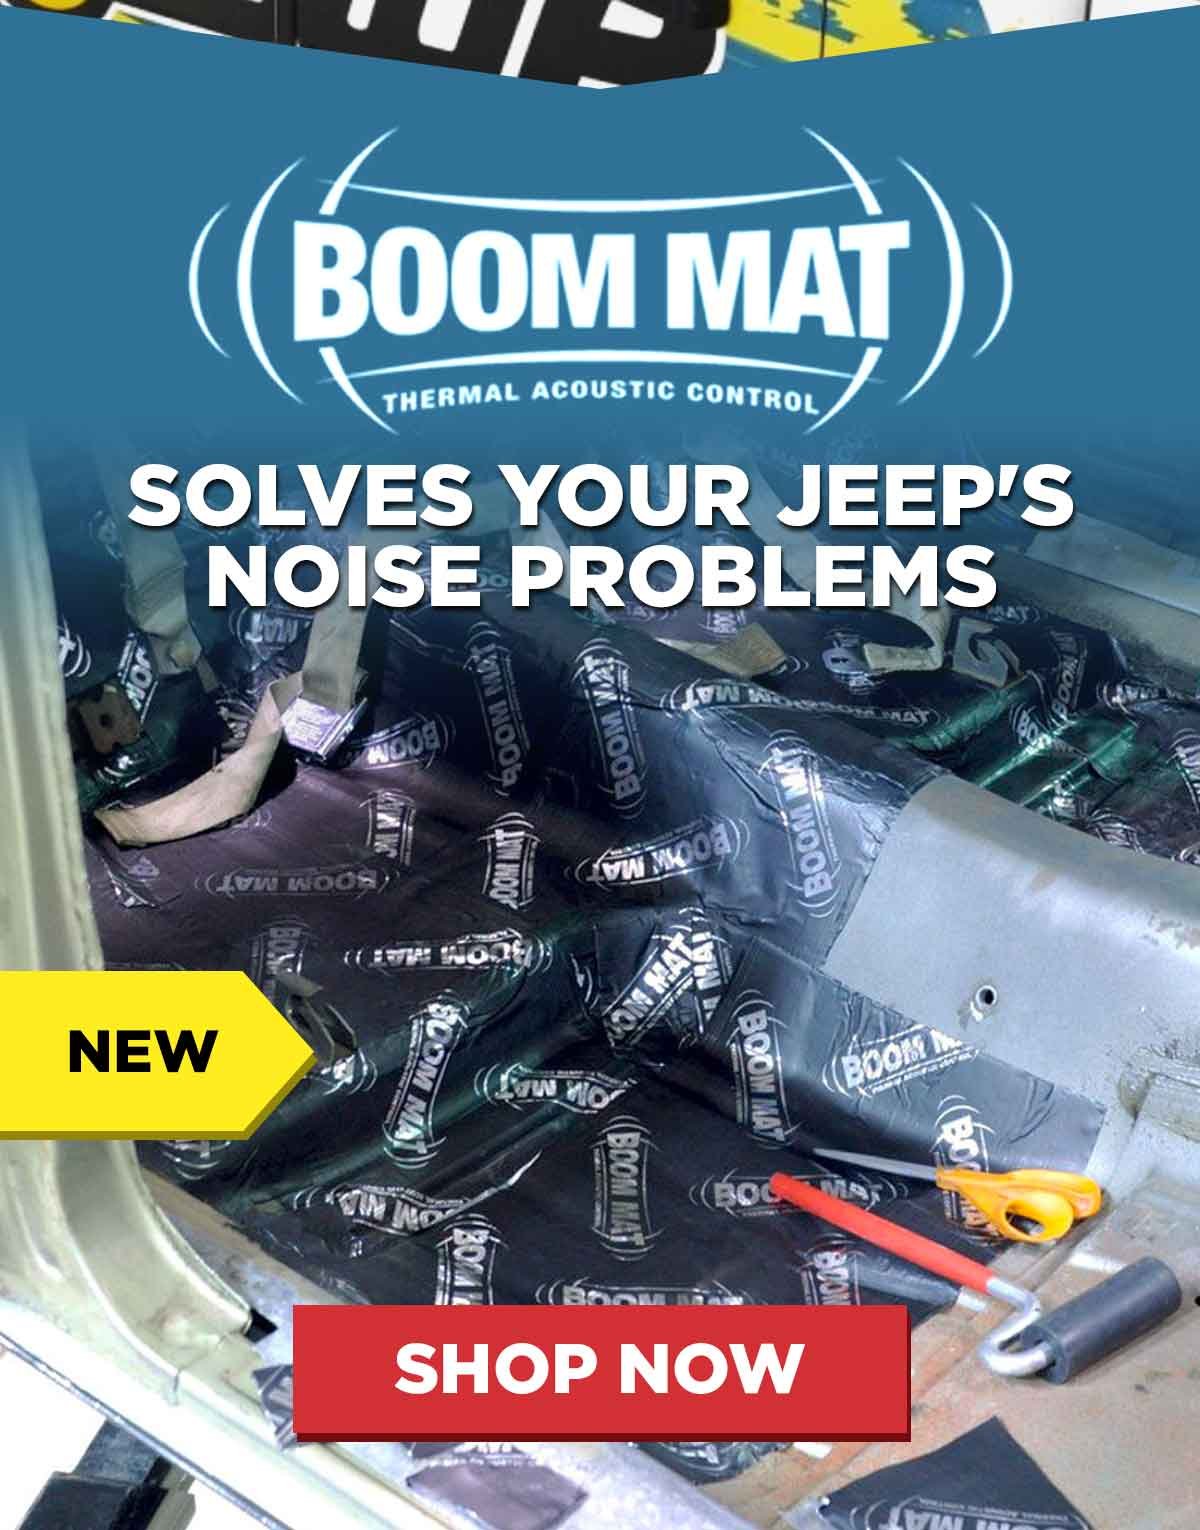 NEW - Boom Mat Solves Your Jeep's Noise Problems